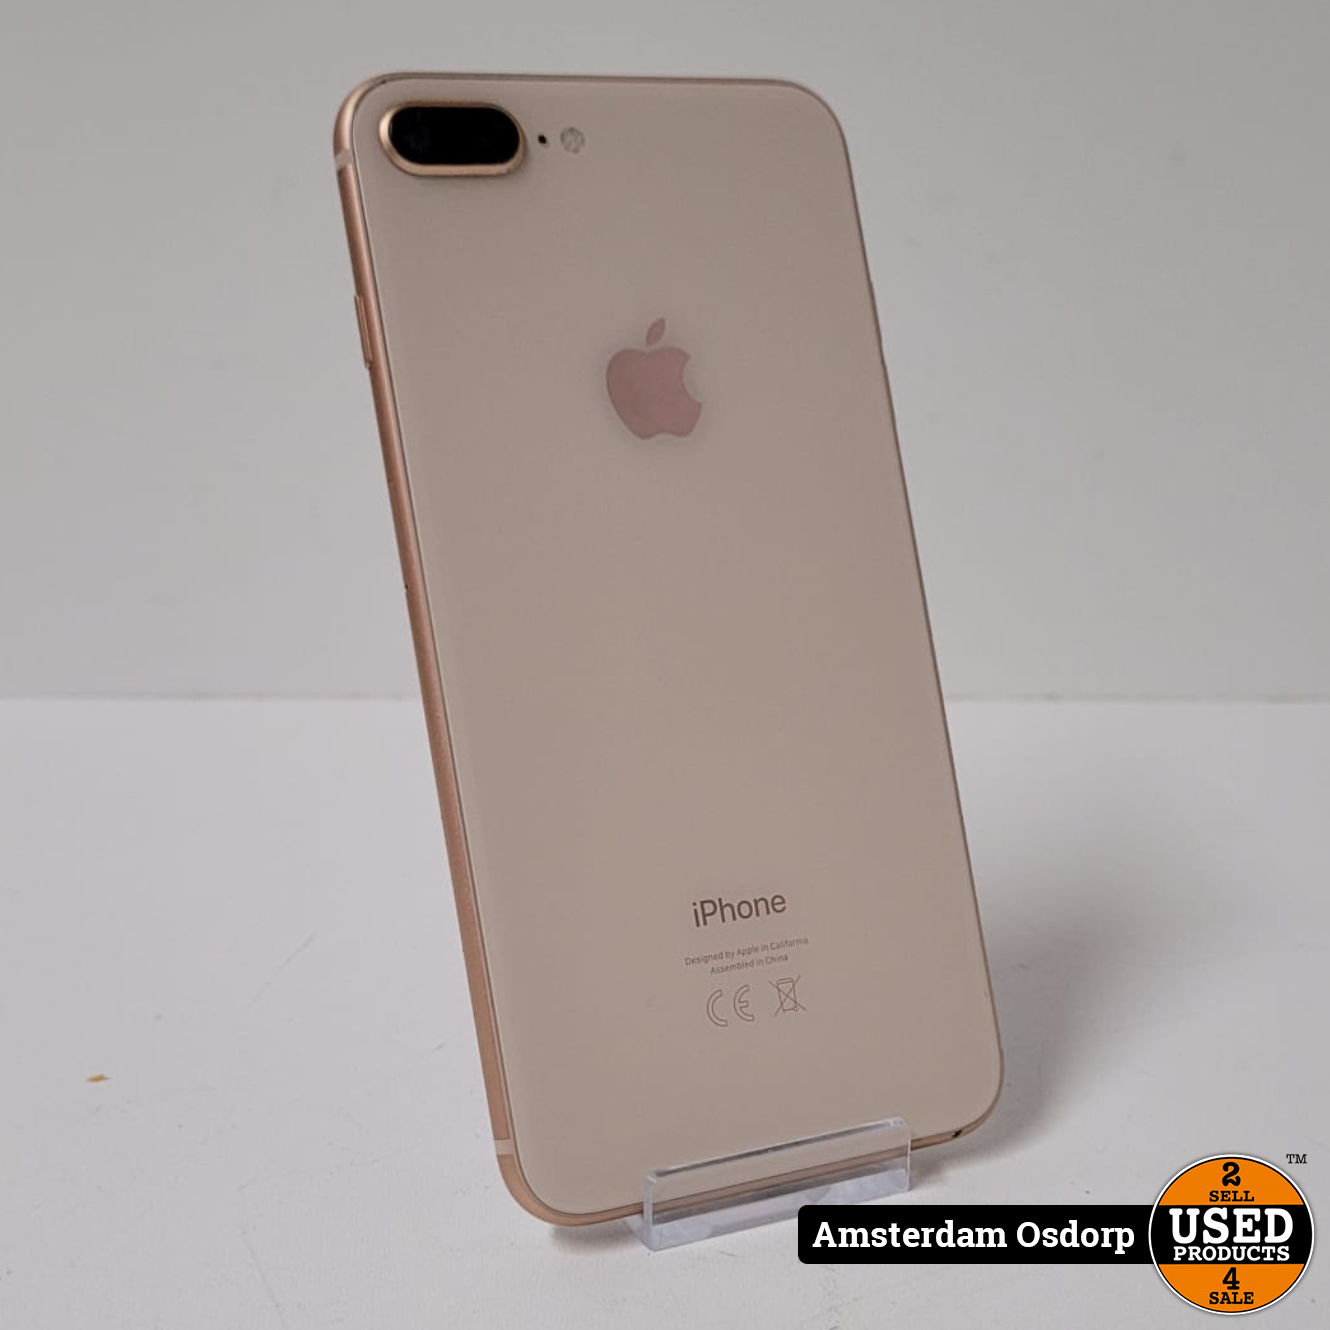 achter rook Archaïsch Apple IPhone 8 plus 64gb Rose Gold | nette staat - Used Products Osdorp